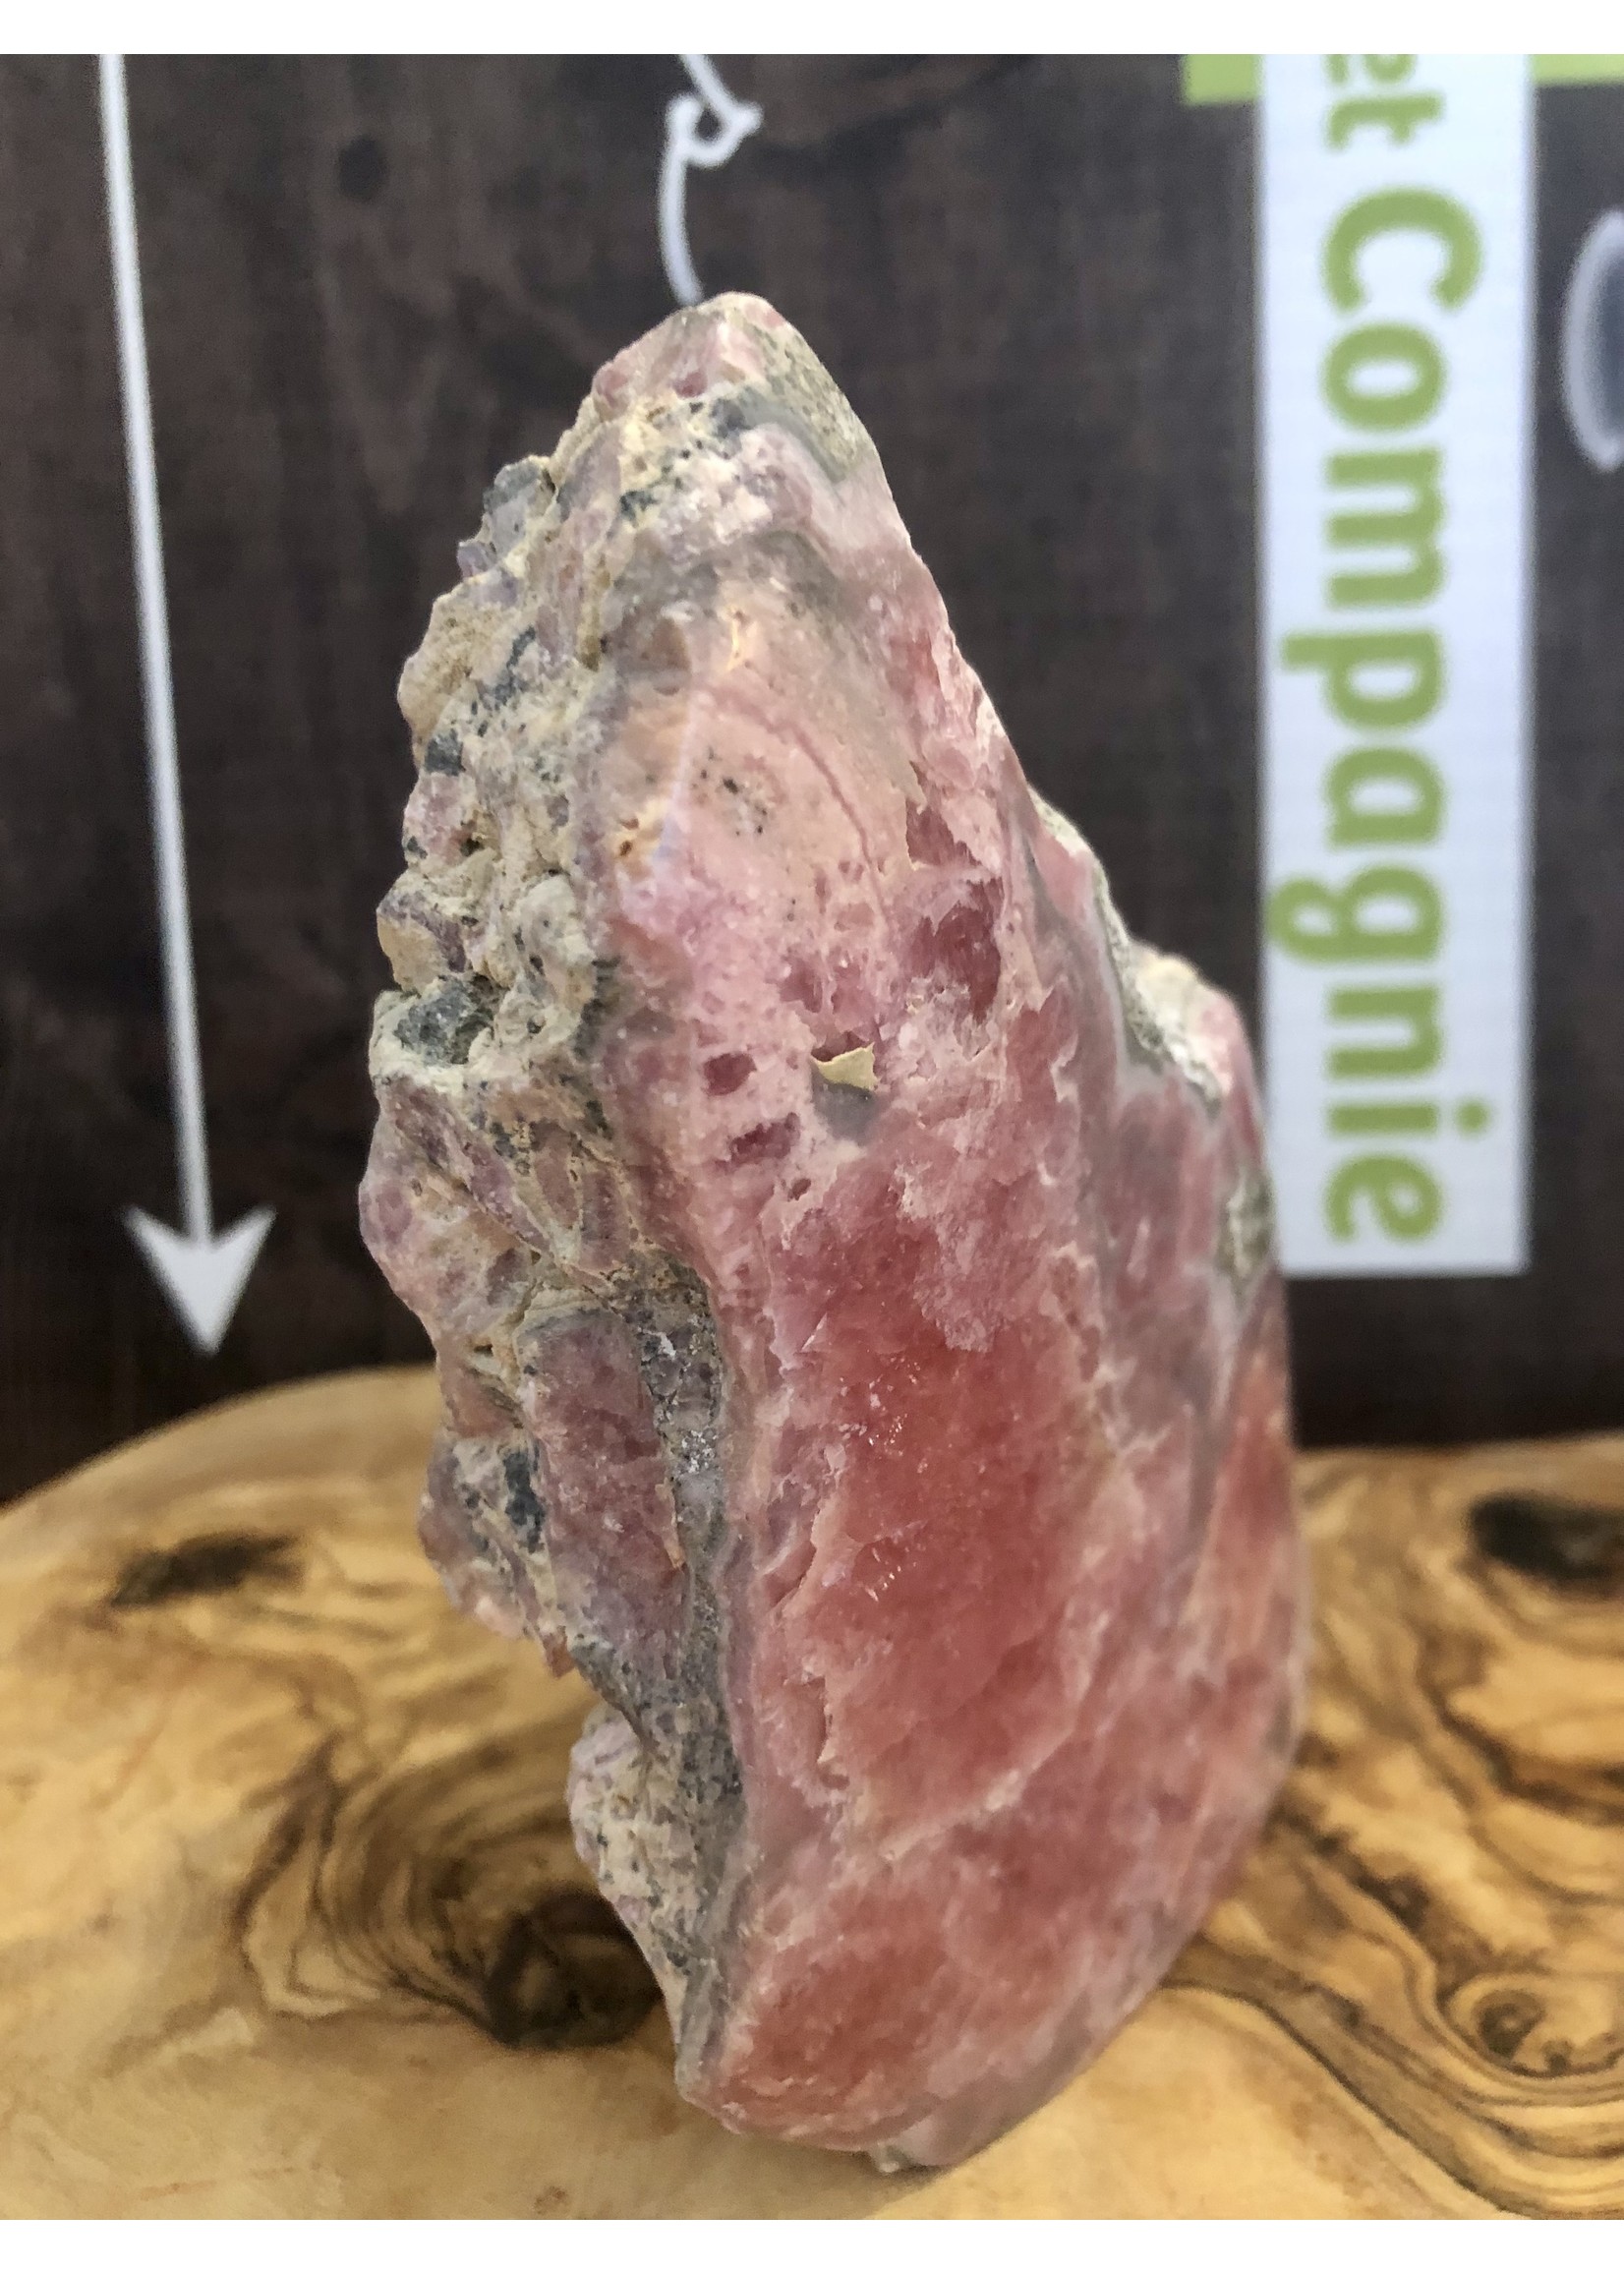 extra large natural rhodochrosite rock, this stone could regulate diabetes mellitus and would also be able to calm arthritis